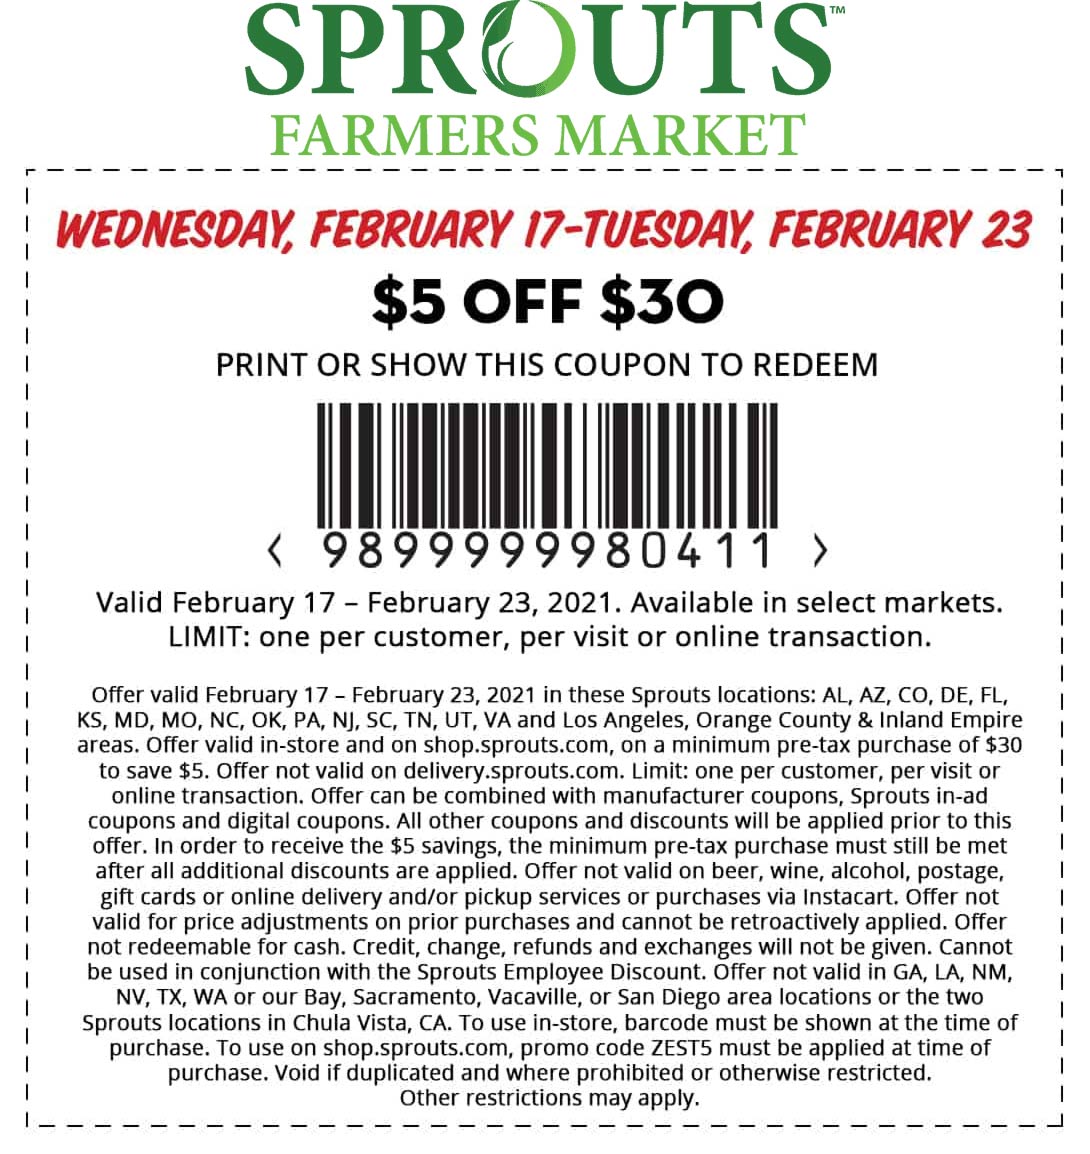 Sprouts stores Coupon  $5 off $30 at Sprouts Farmers Market grocery, or online via promo code ZEST5 #sprouts 